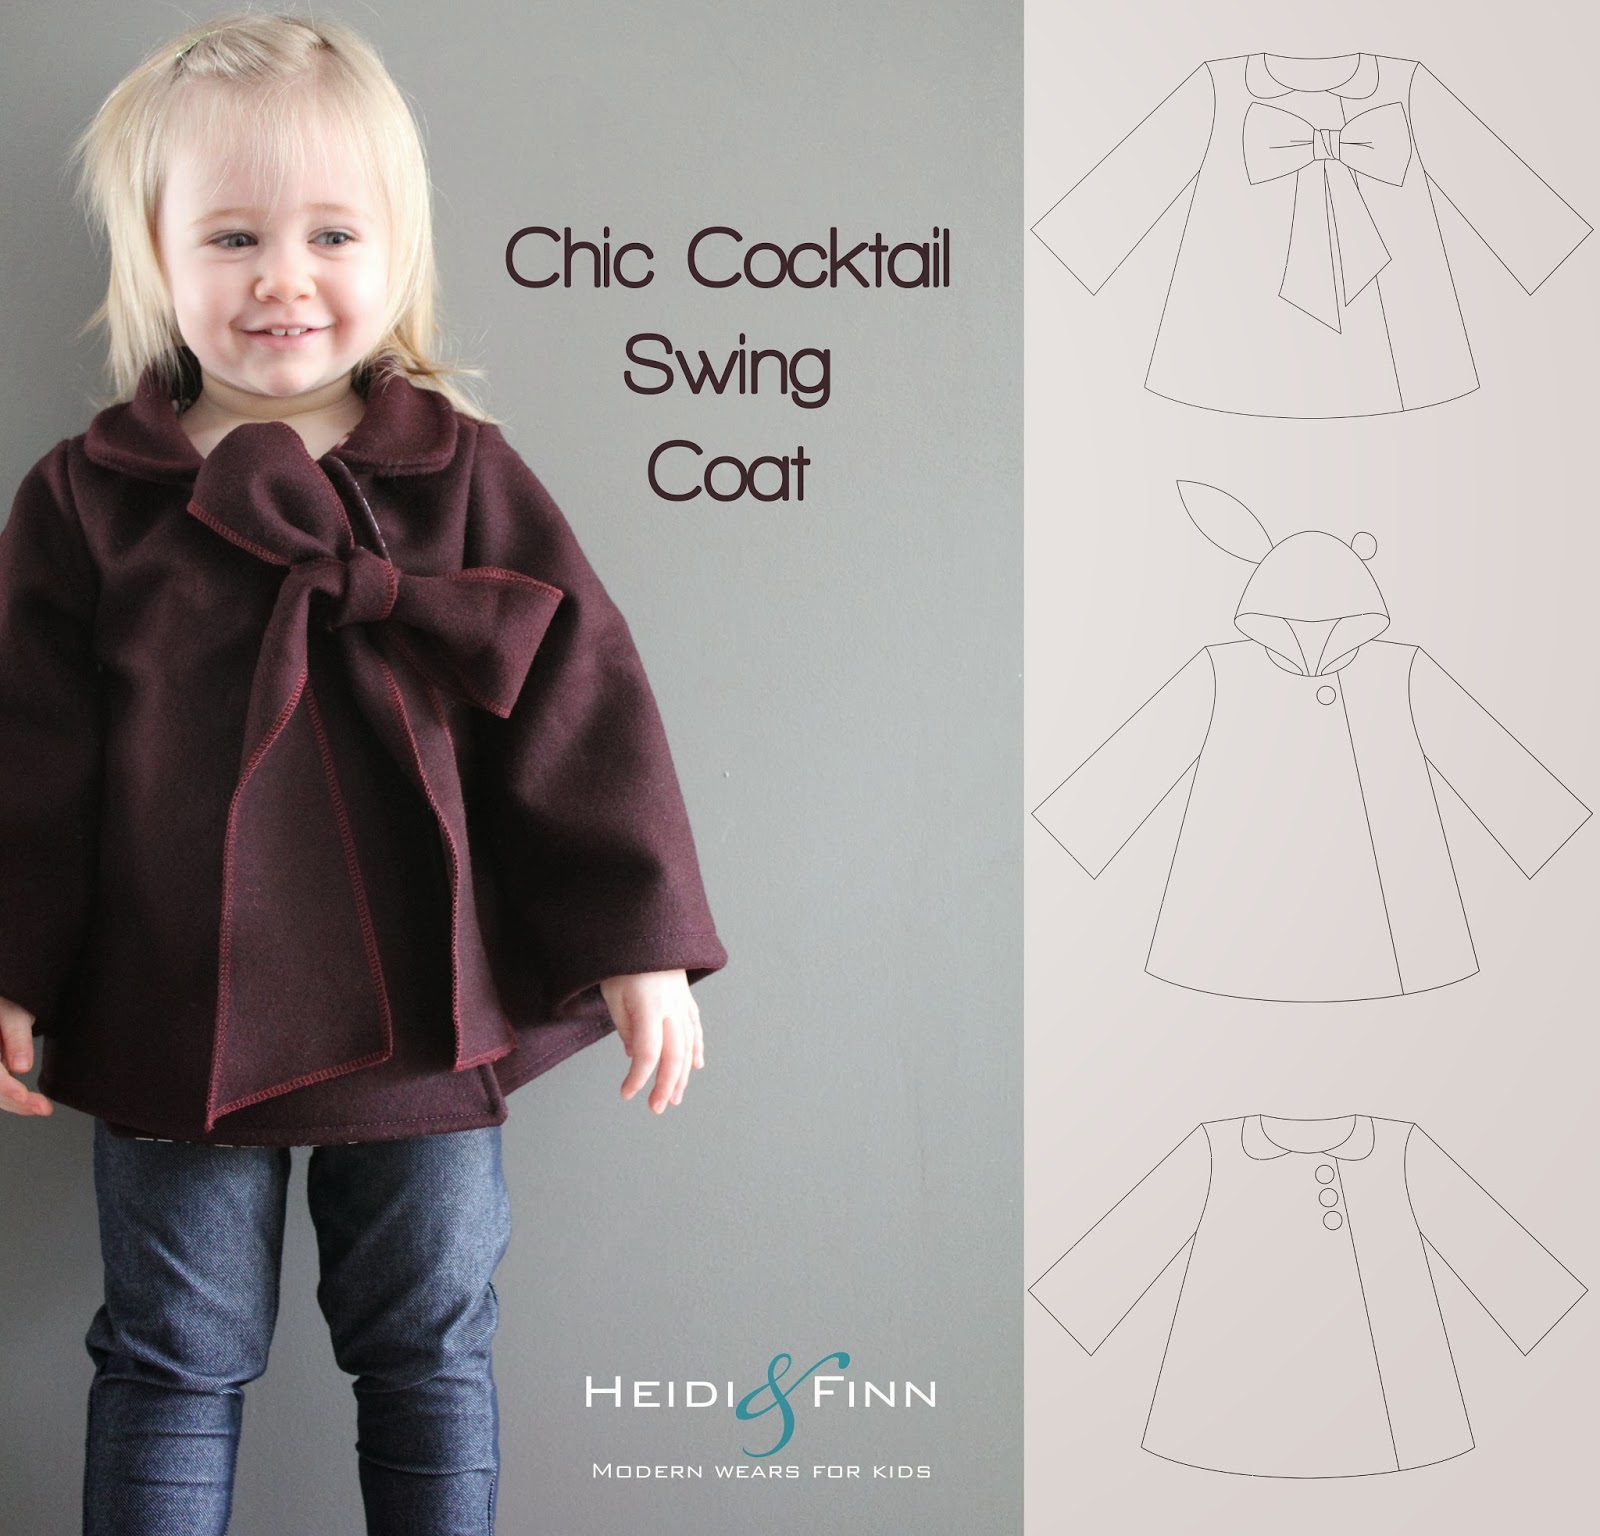 http://www.craftsy.com/pattern/sewing/clothing/sale-chic-cocktail-swing-coat-12m-5t/51593